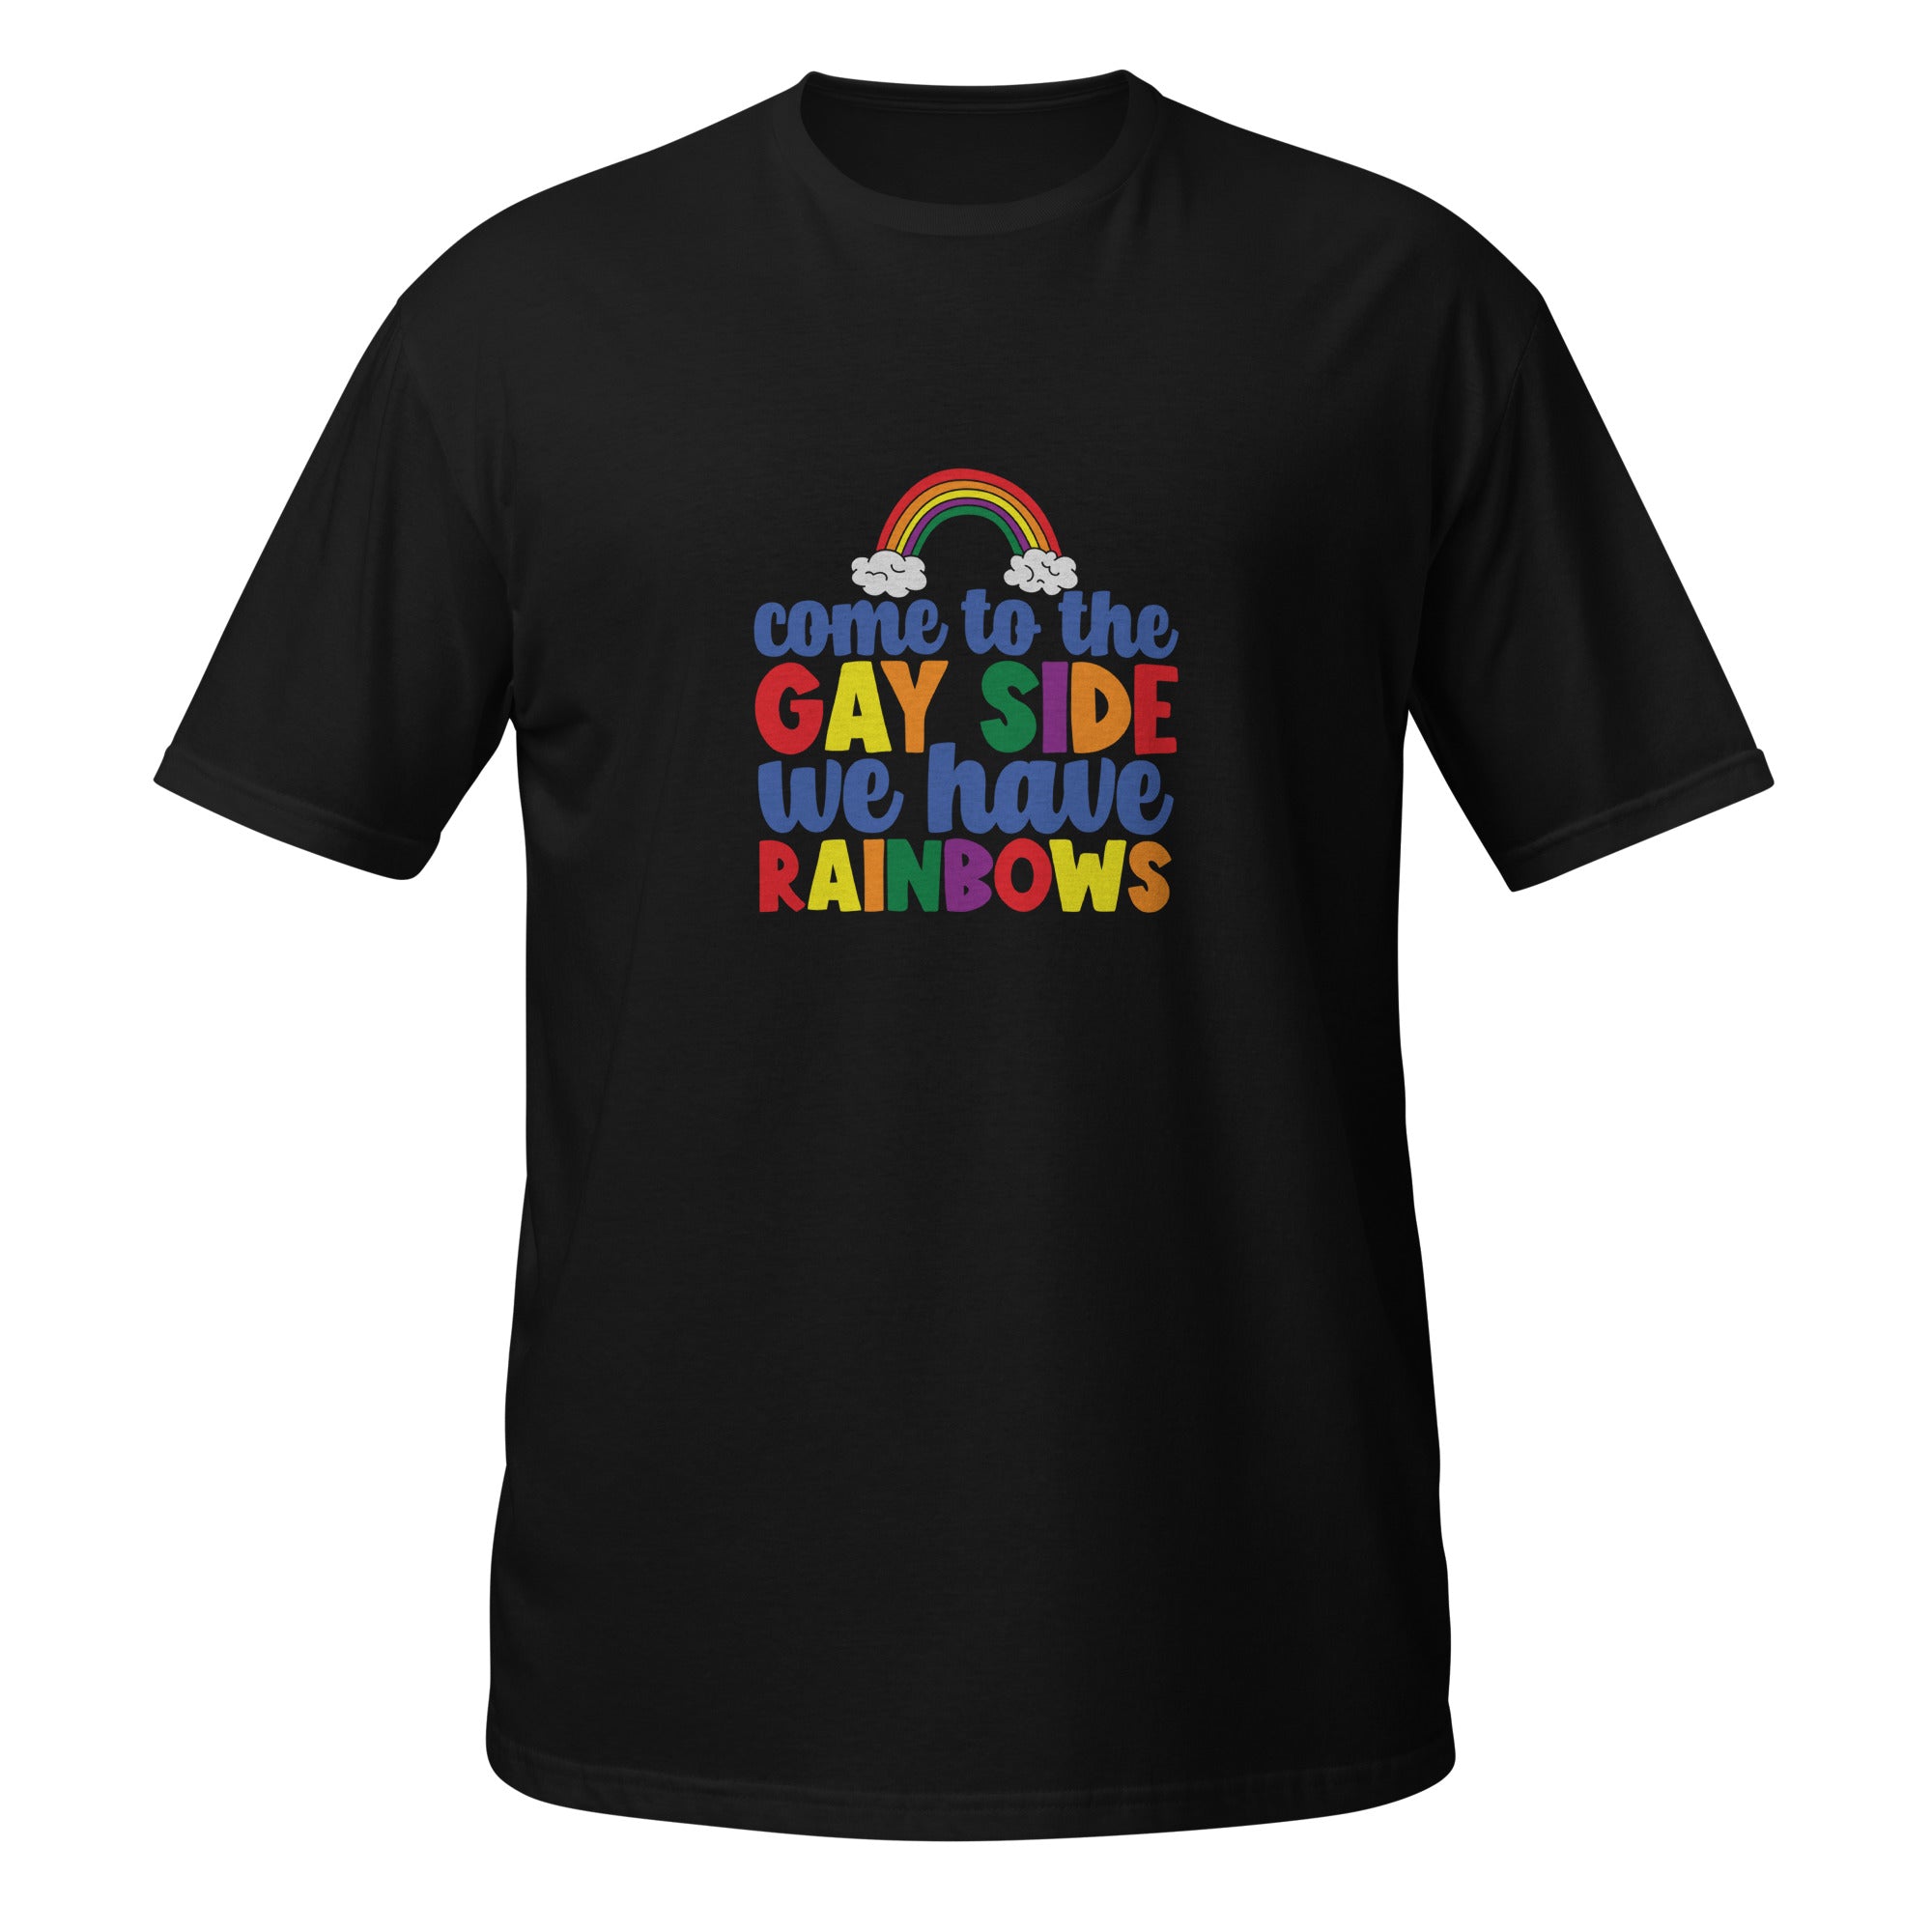 Short-Sleeve Unisex T-Shirt- Come to the gay side we have rainbows